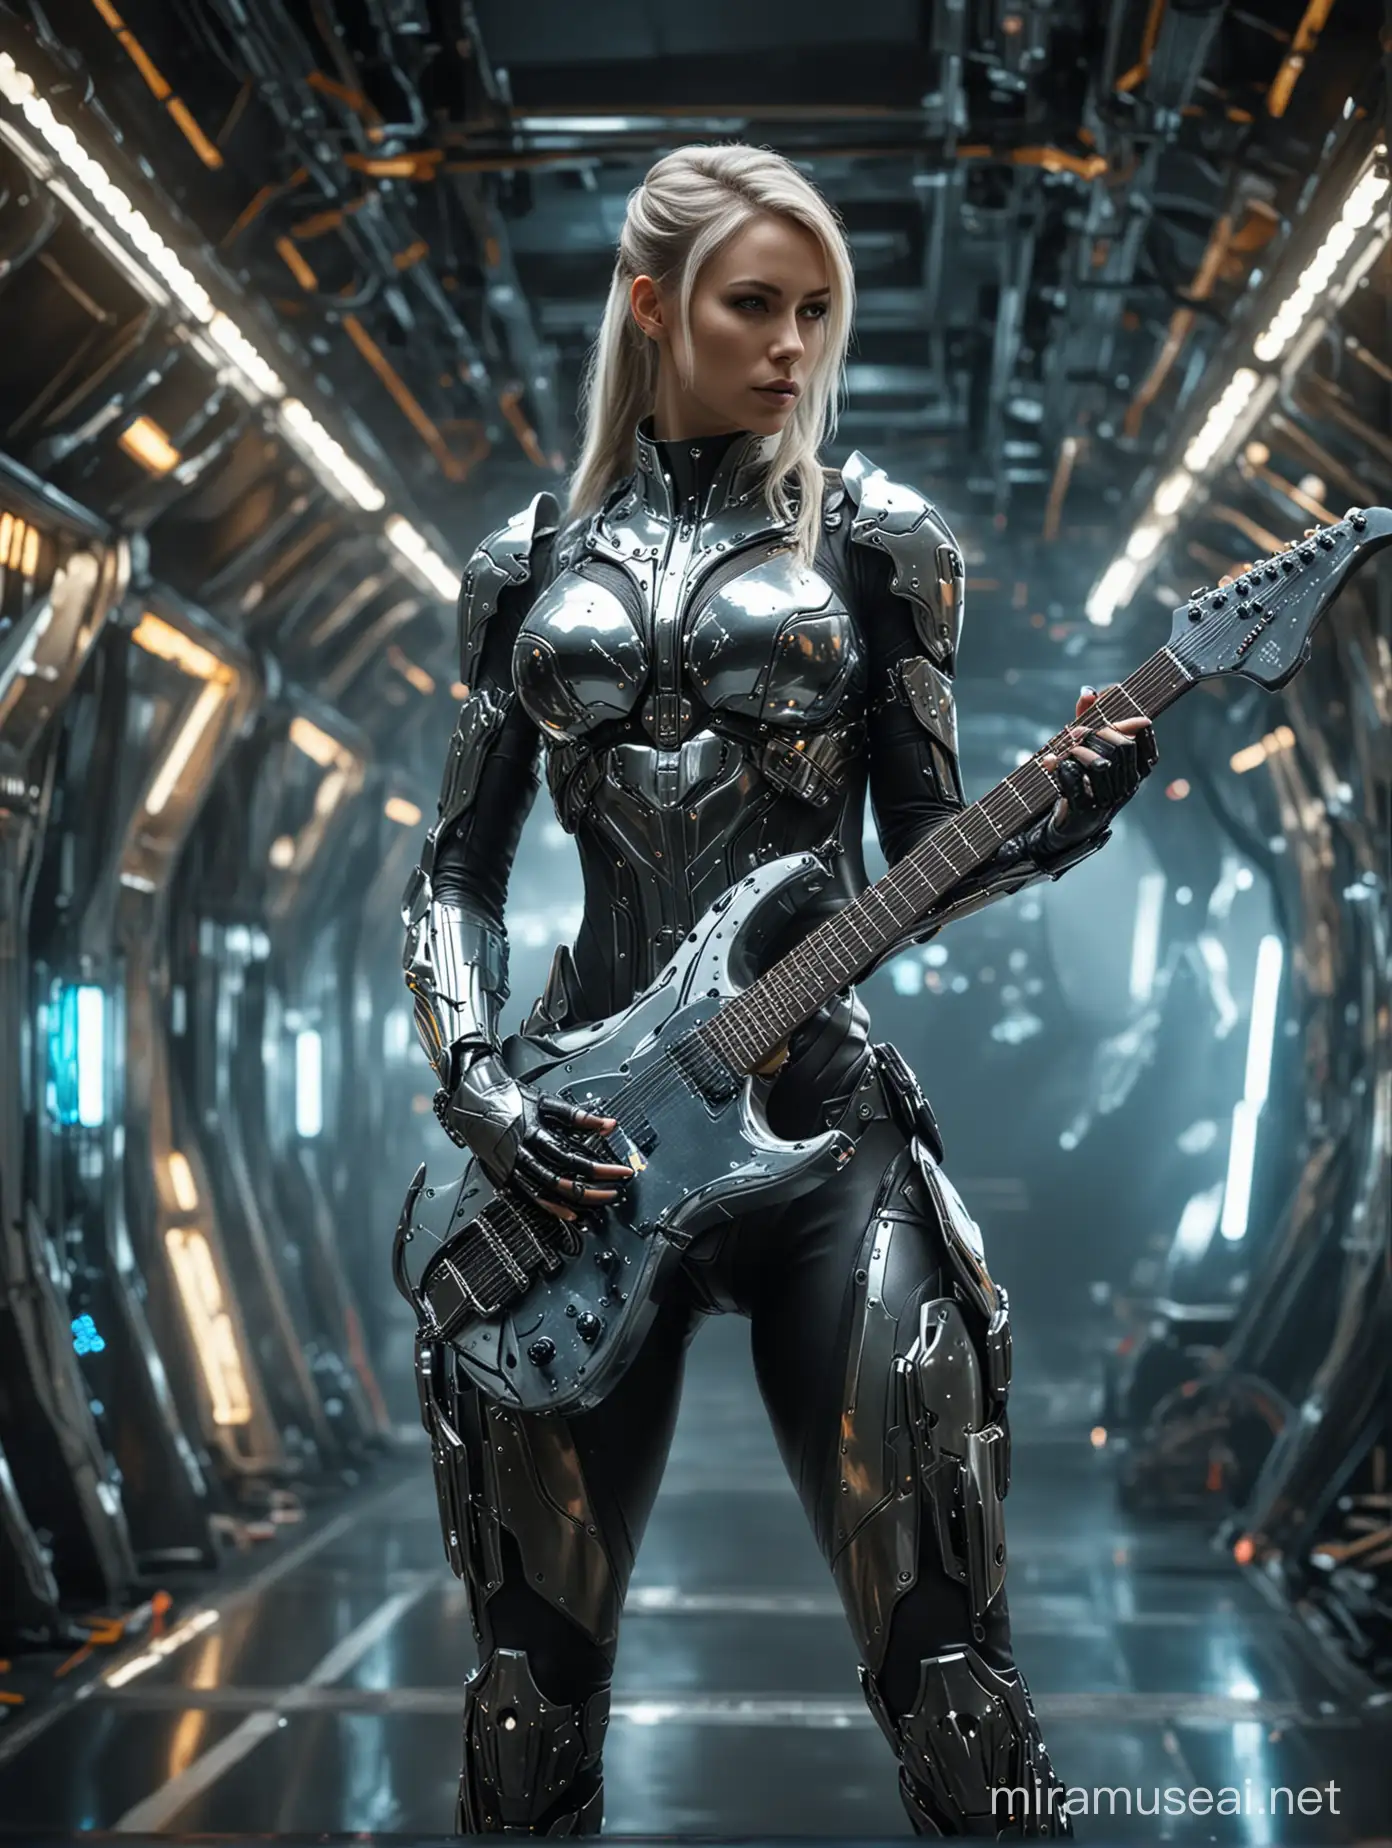 Front View photography Beautiful army futuristic woman cyborg, warframe armor mechanical metalic chrome bright shines playing electric guitar rock in futuristic spaceship interior full of lights colors, Photography beauty colors she on holding futuristic weapon